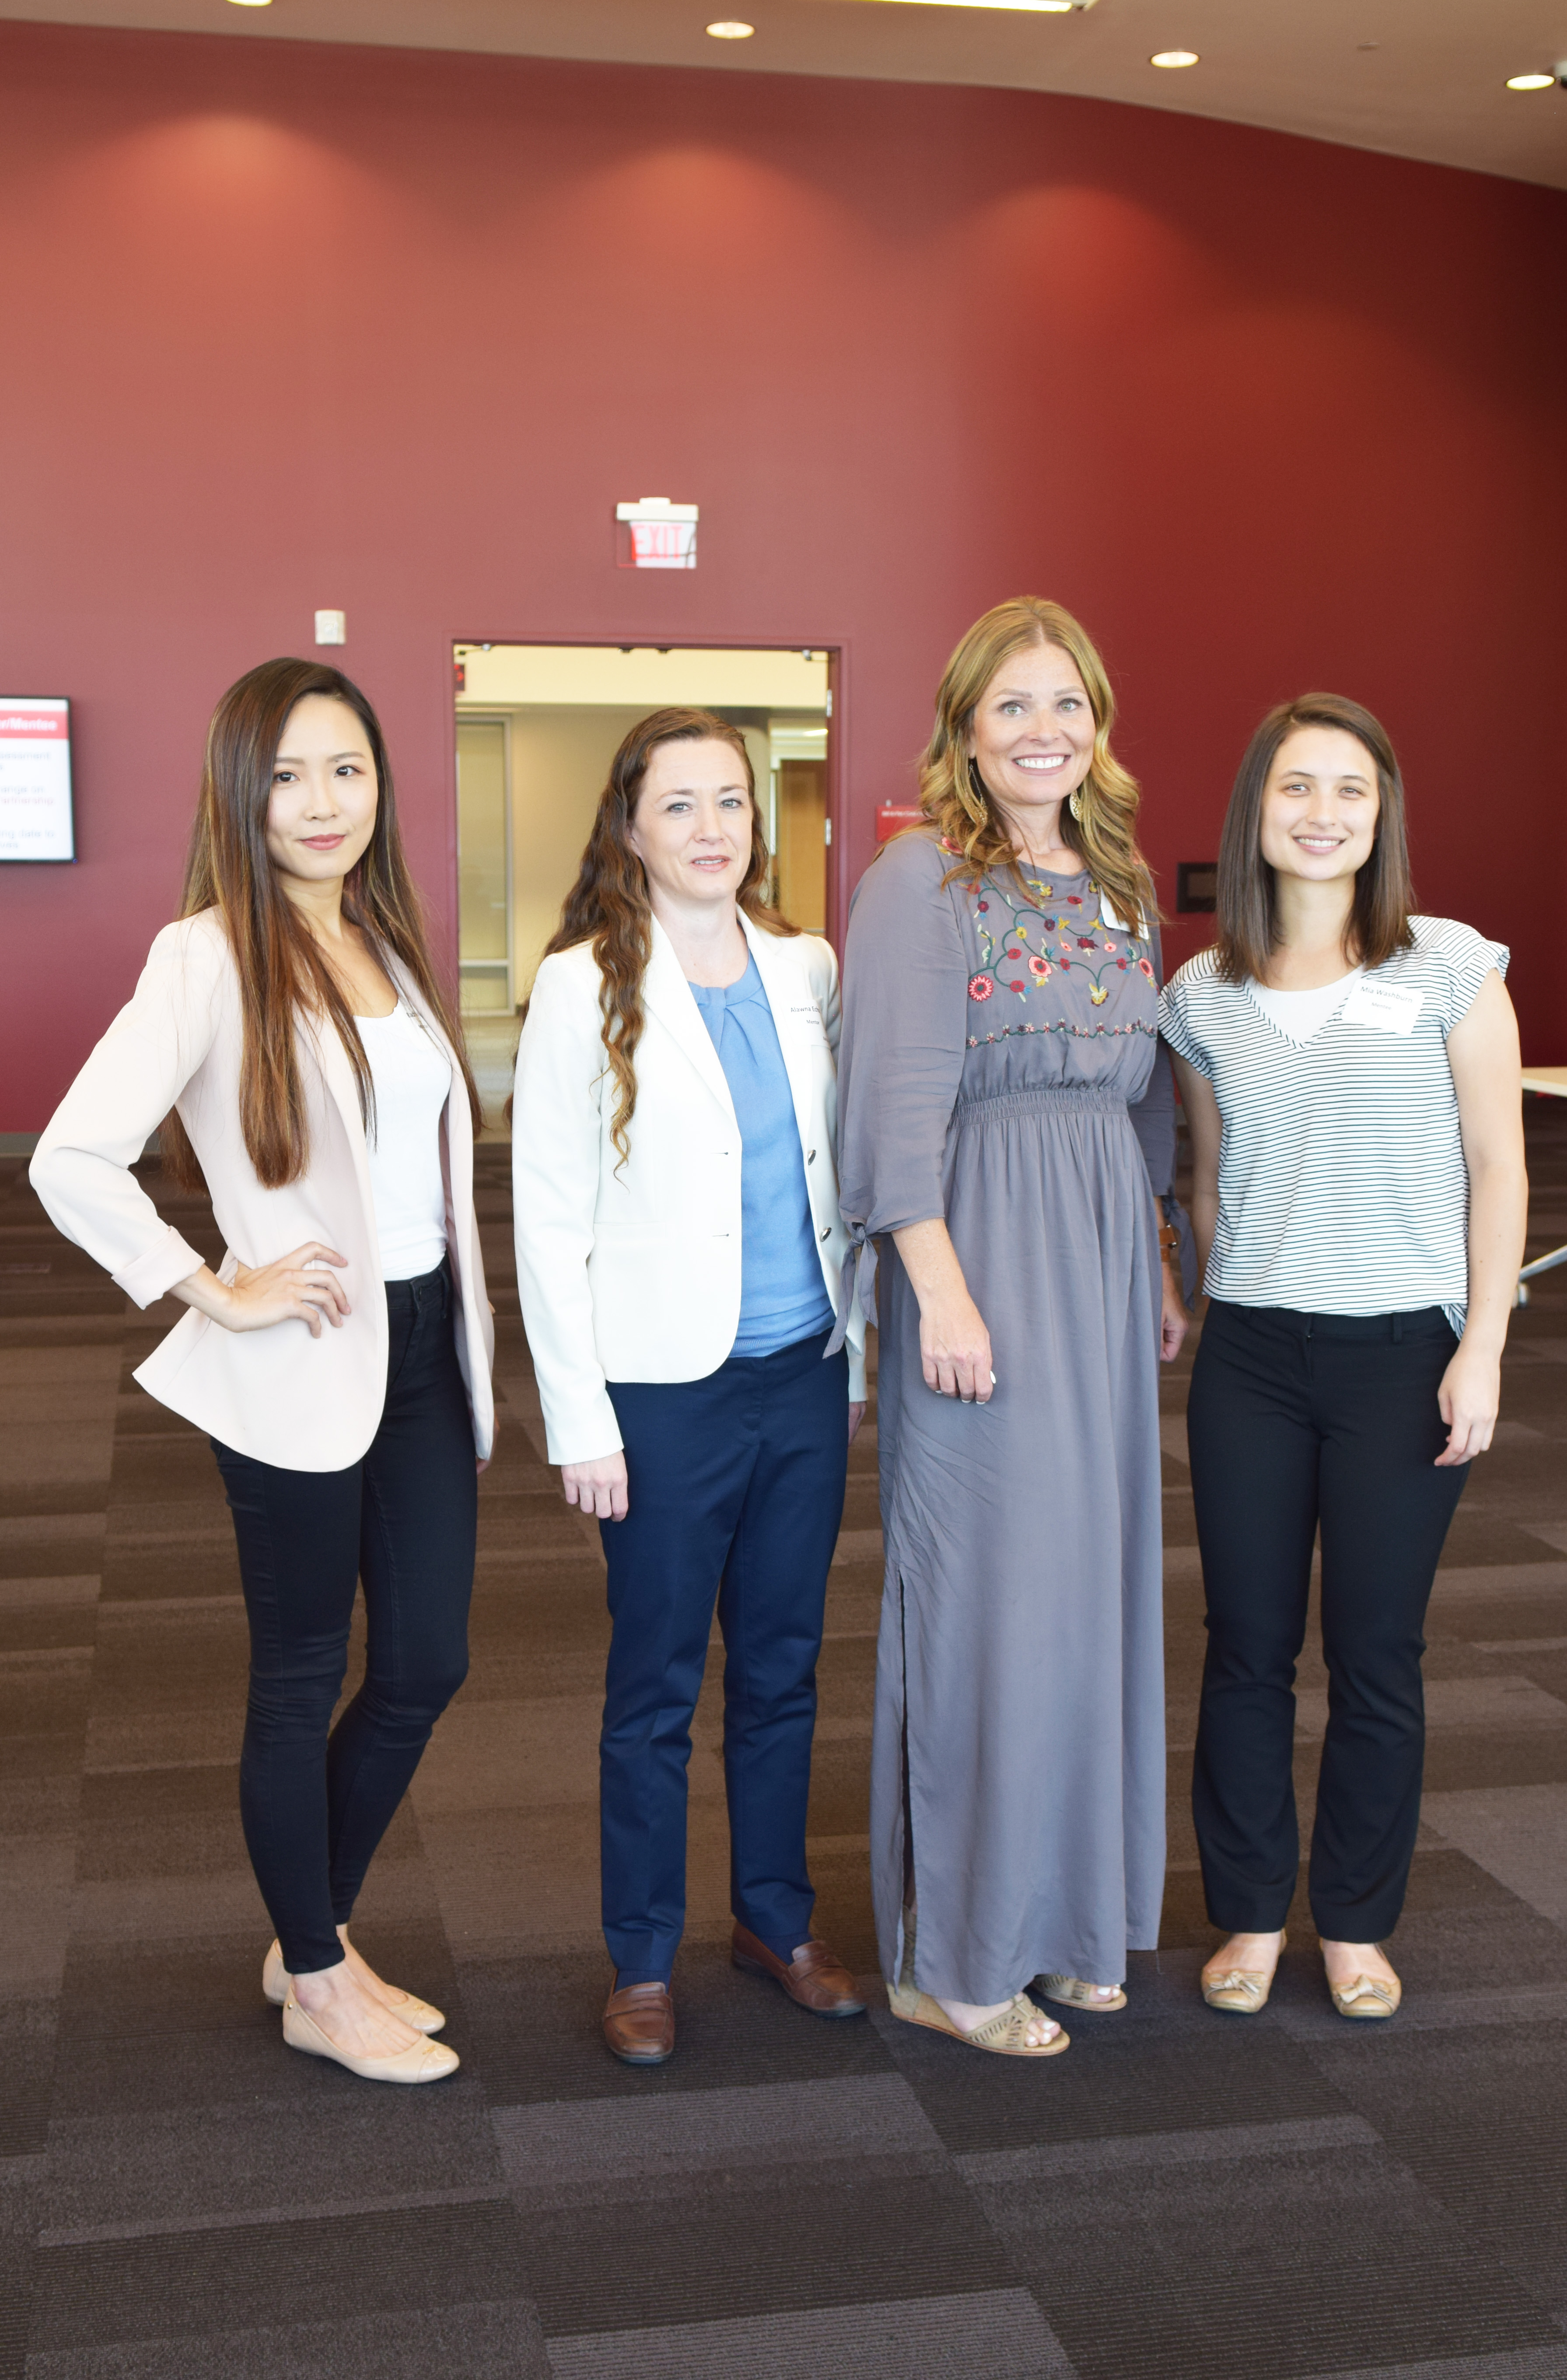 MAcc Women's Mentoring Program supports women as they build careers in accounting